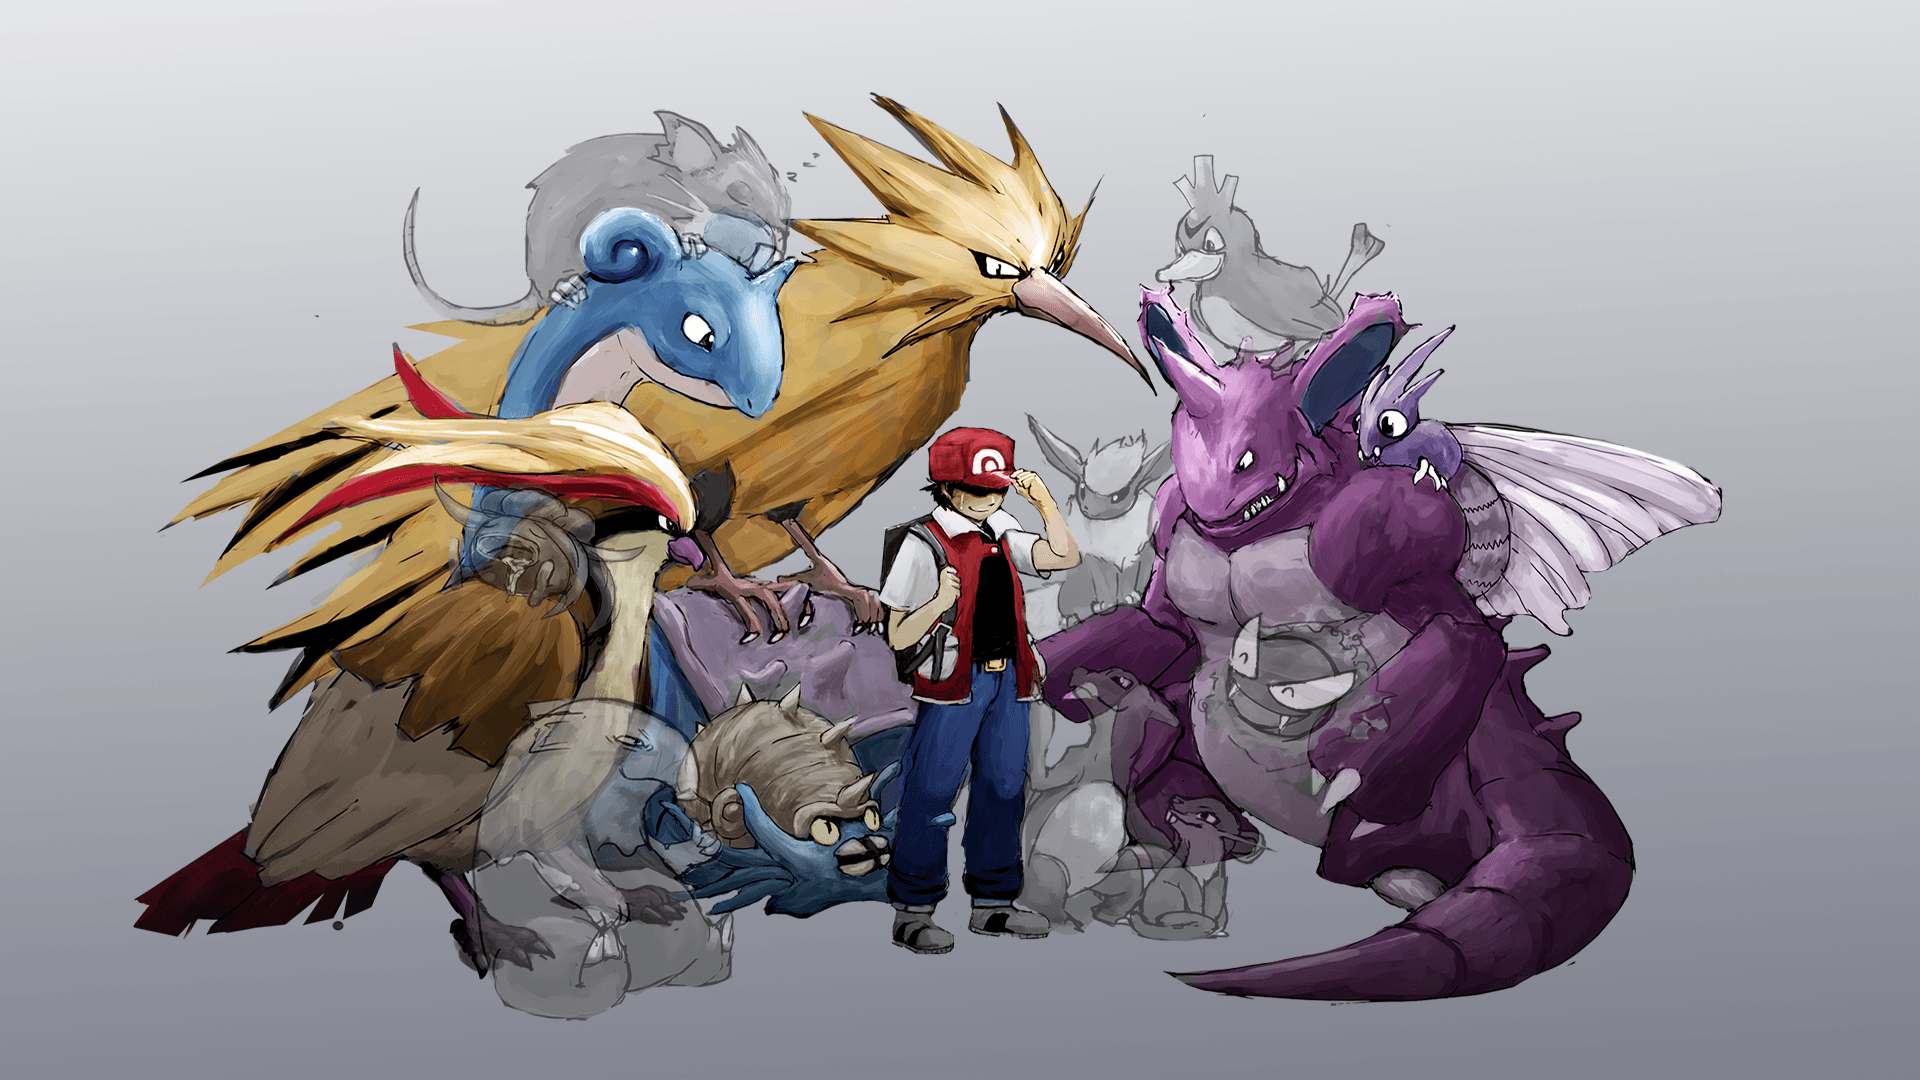 charmeleon, drowzee, farfetch'd, flareon, gastly, and others